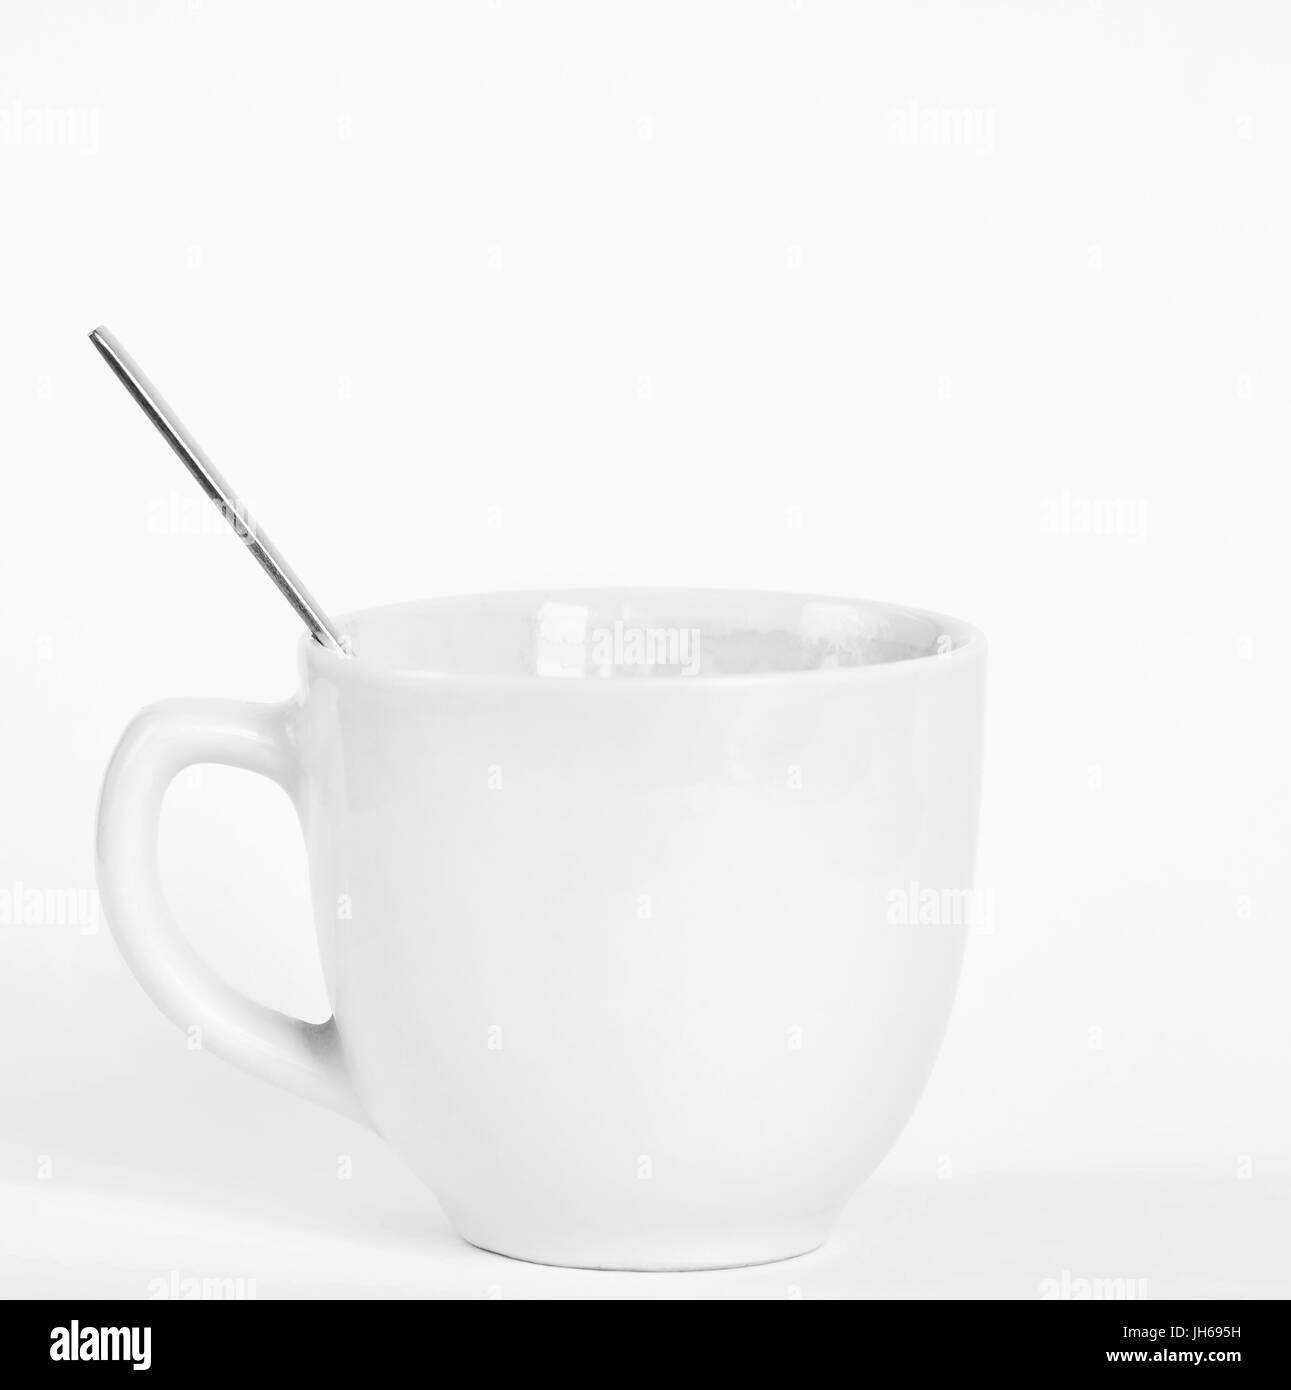 A small white cup of coffee with a spoon. Isolated on a clean white background. Stock Photo